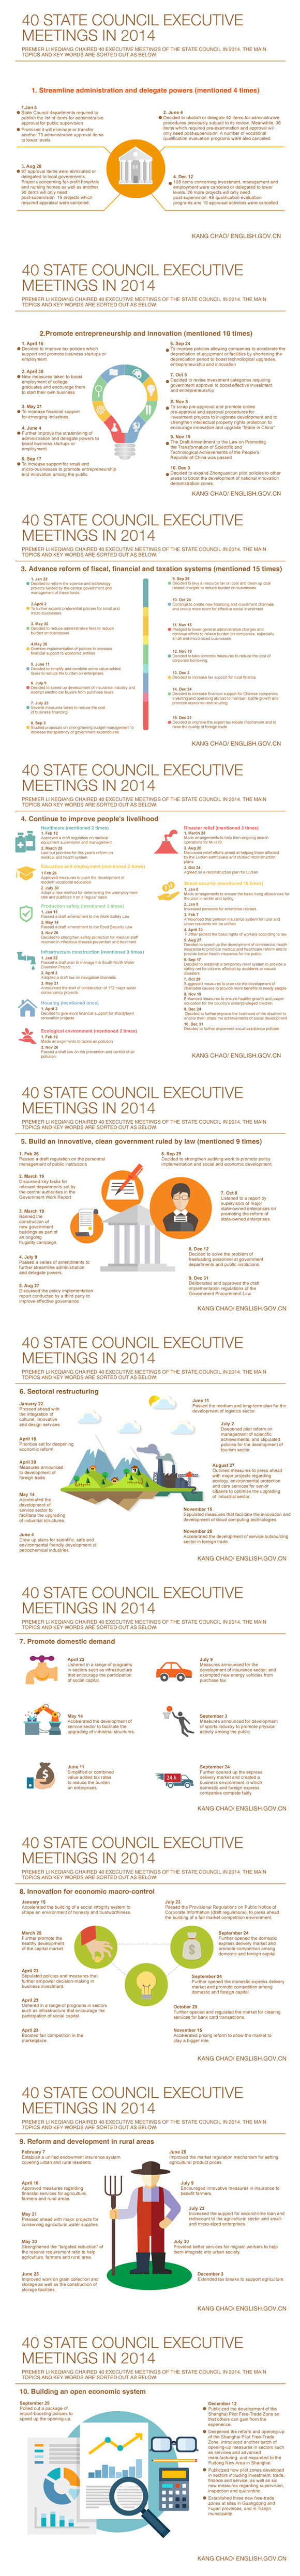 40 State Council Executive Meetings in 2014